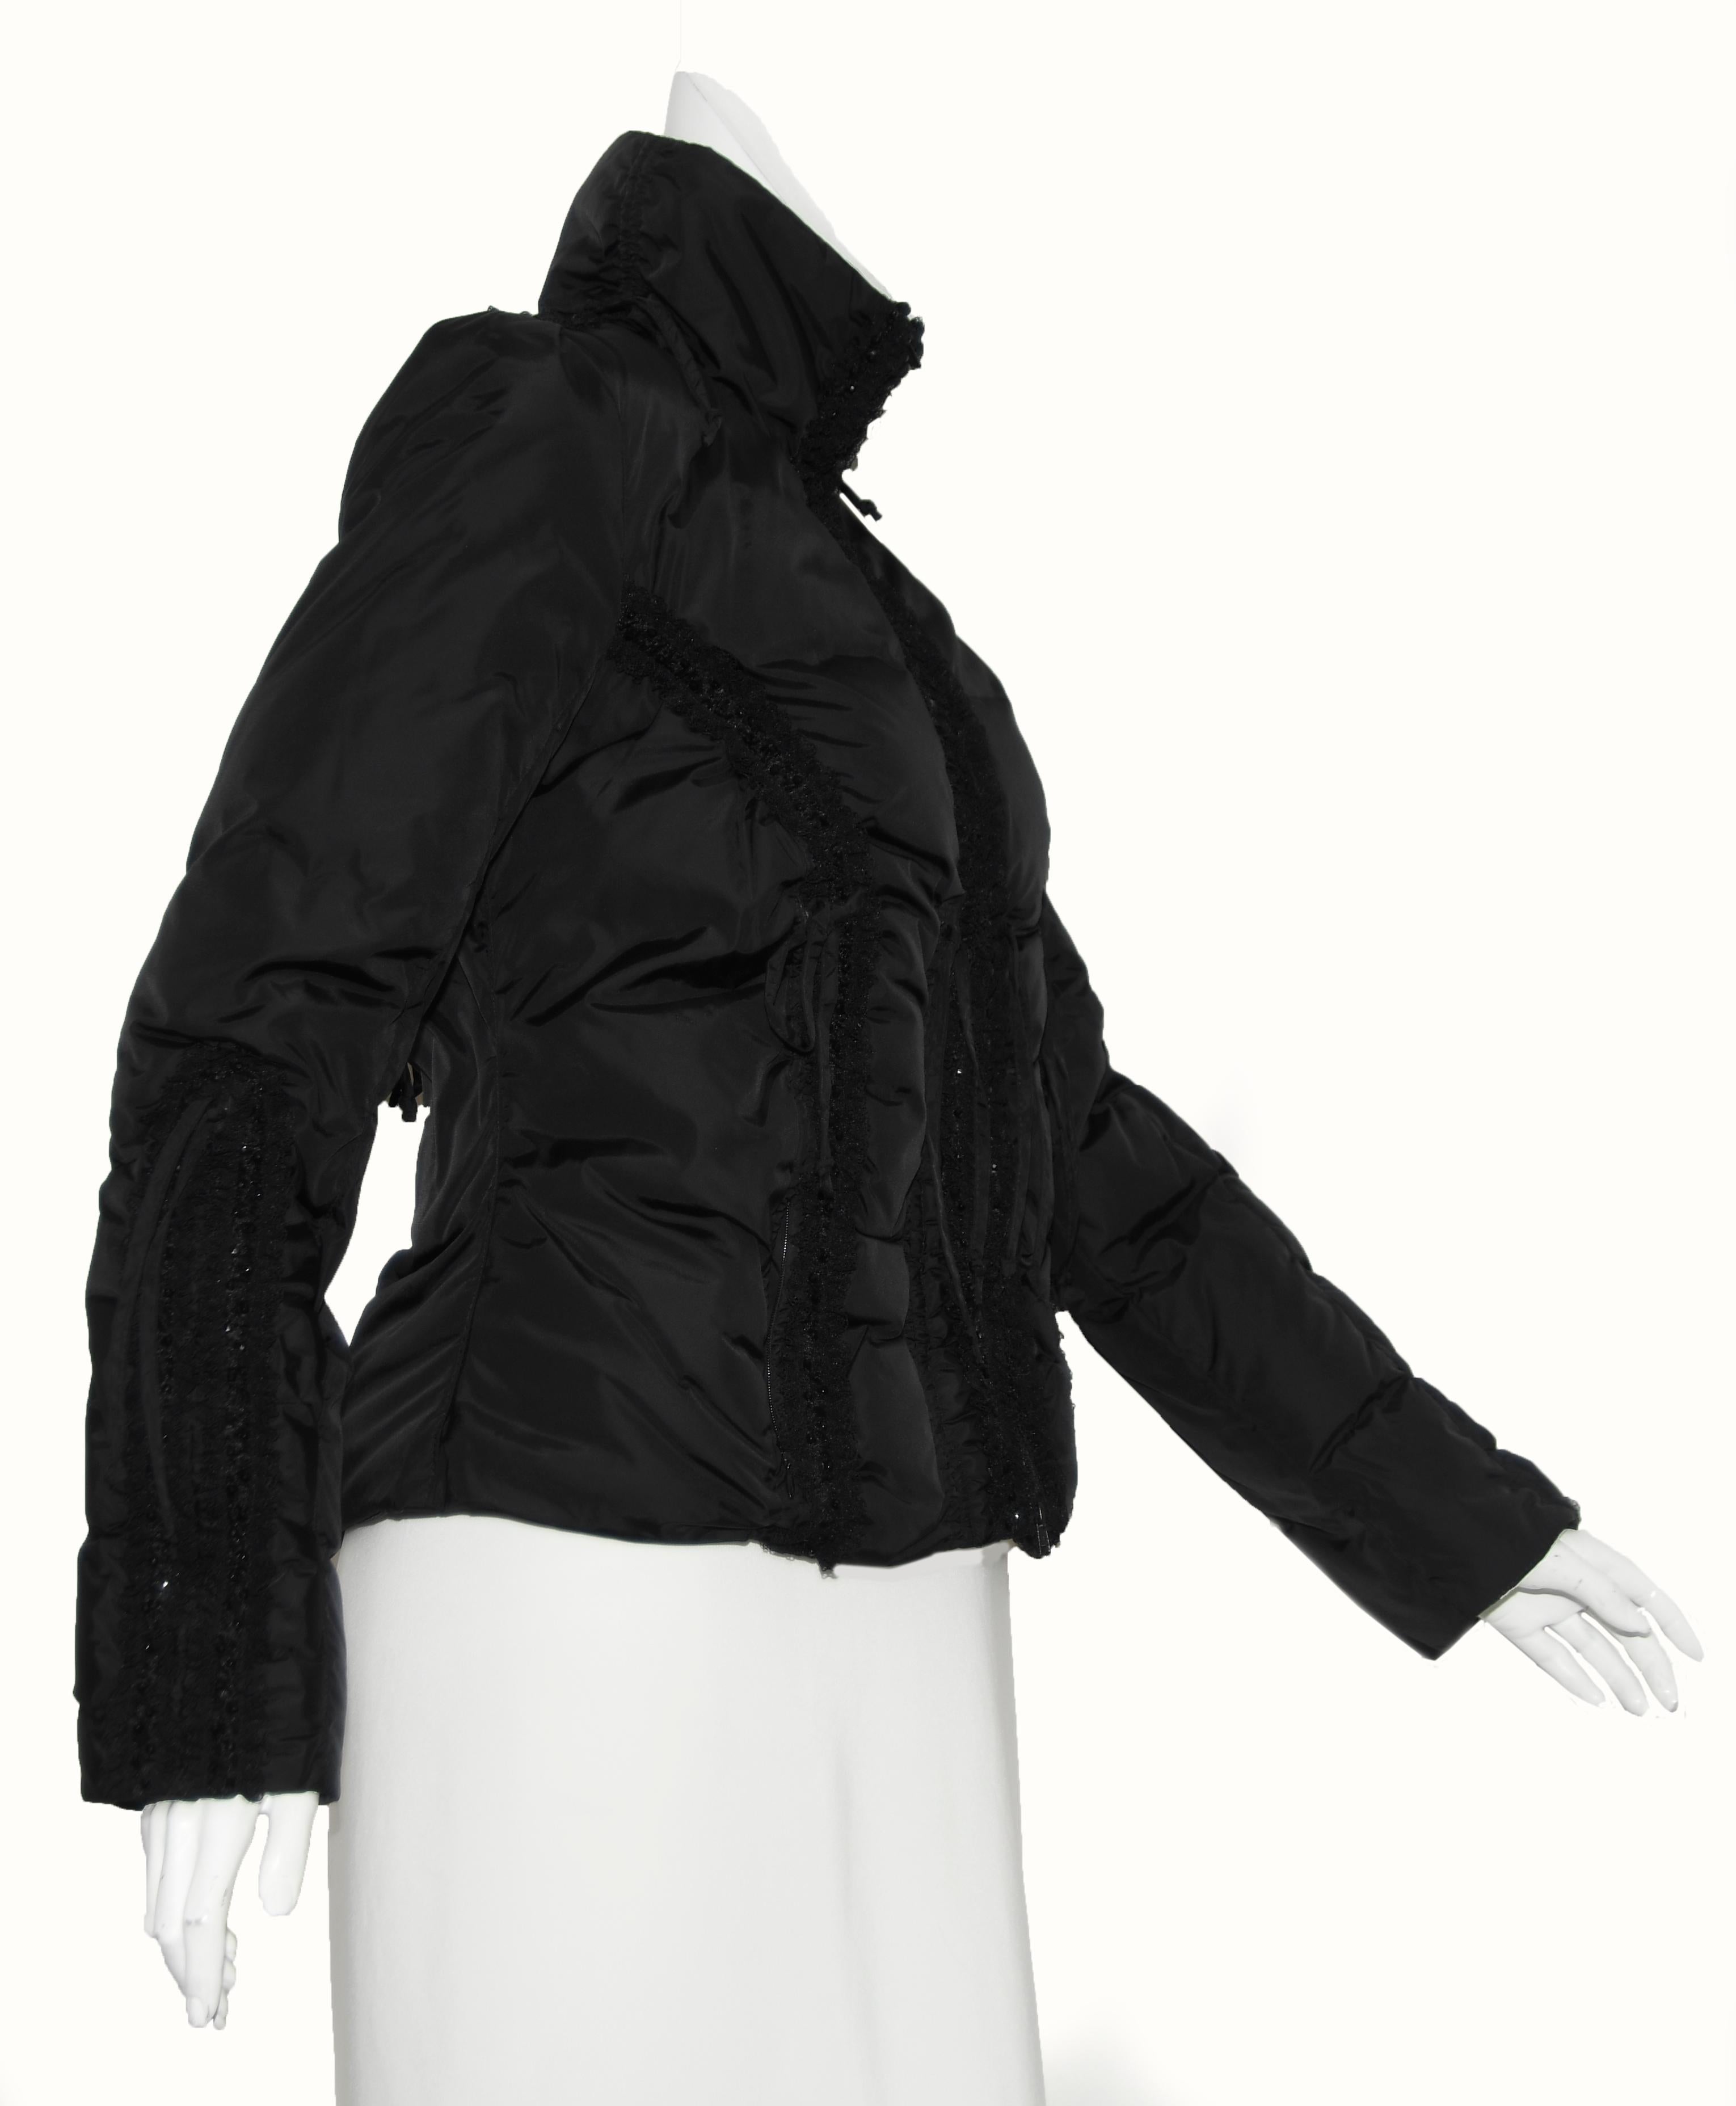 Blumarine black goose down puffer jacket is decorated with lace and beads.  This ultra feminine looking jacket is very strong and will keep you warm!  The lace and bead trim can be found on the sleeves, the zipper opening and one strip on each side